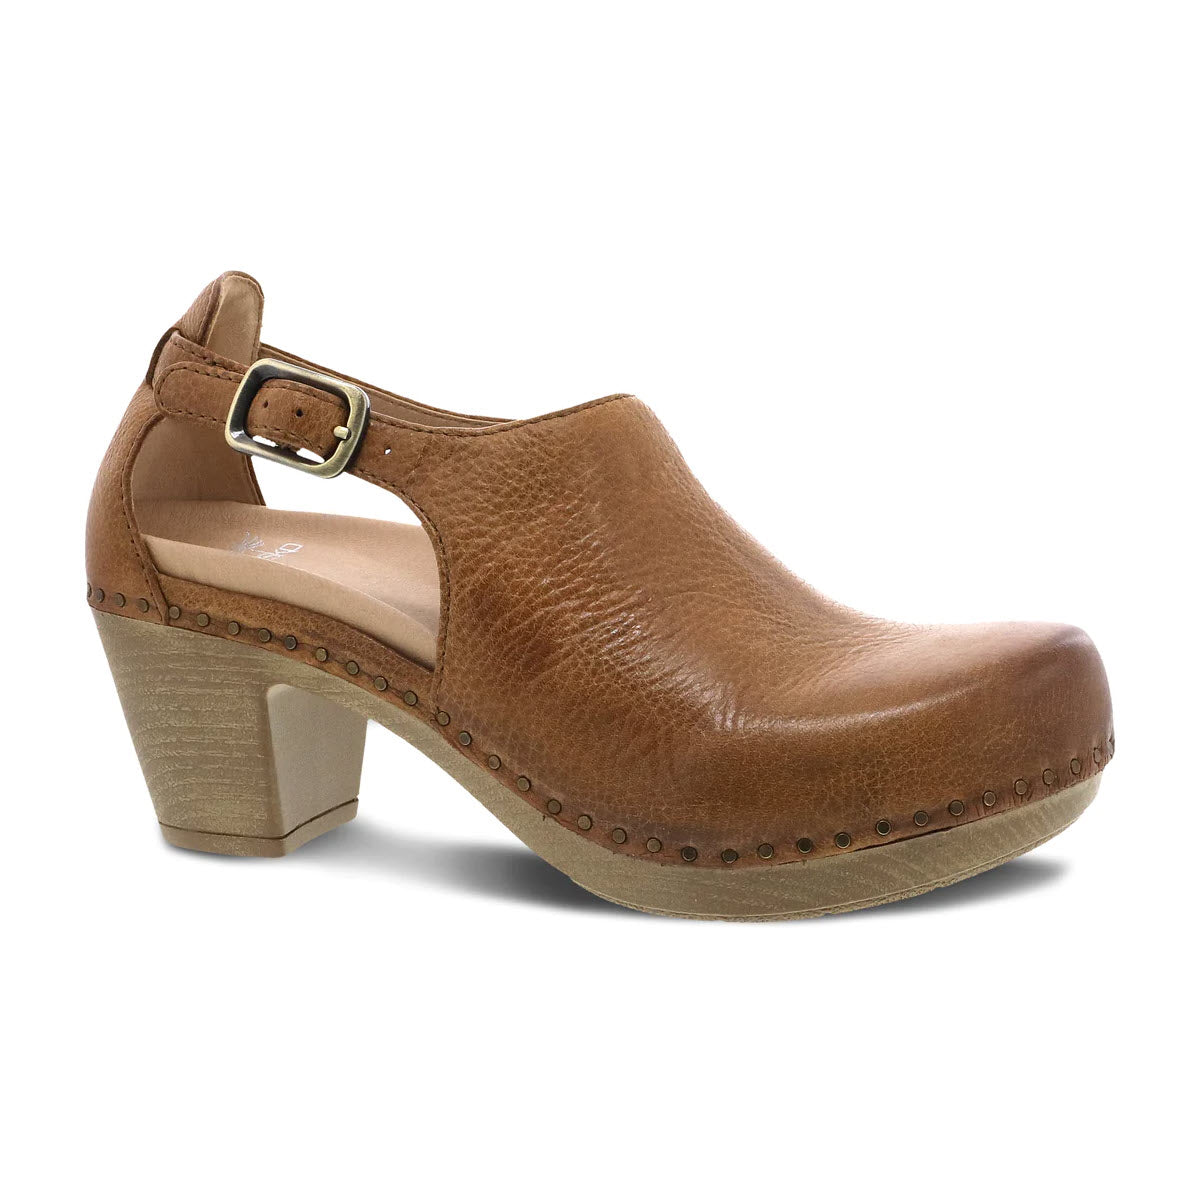 A brown high-quality leather clog with a buckle, wooden heel, and studded detail around the sole - Dansko Sassy Tan Womens.